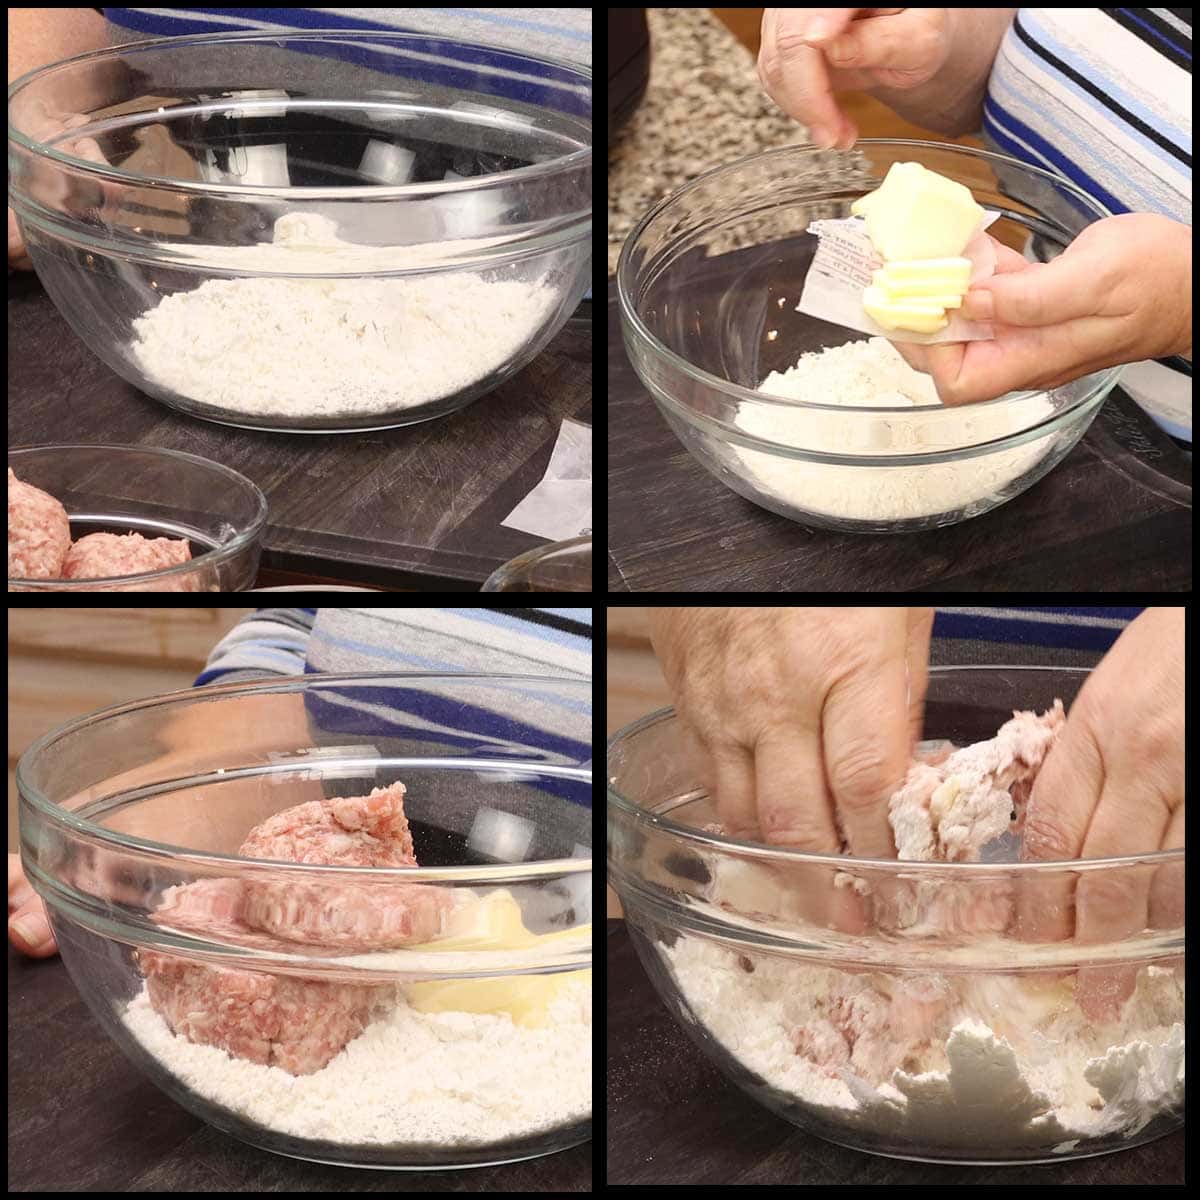 Mixing flour, butter, sausage together in mixing bowl